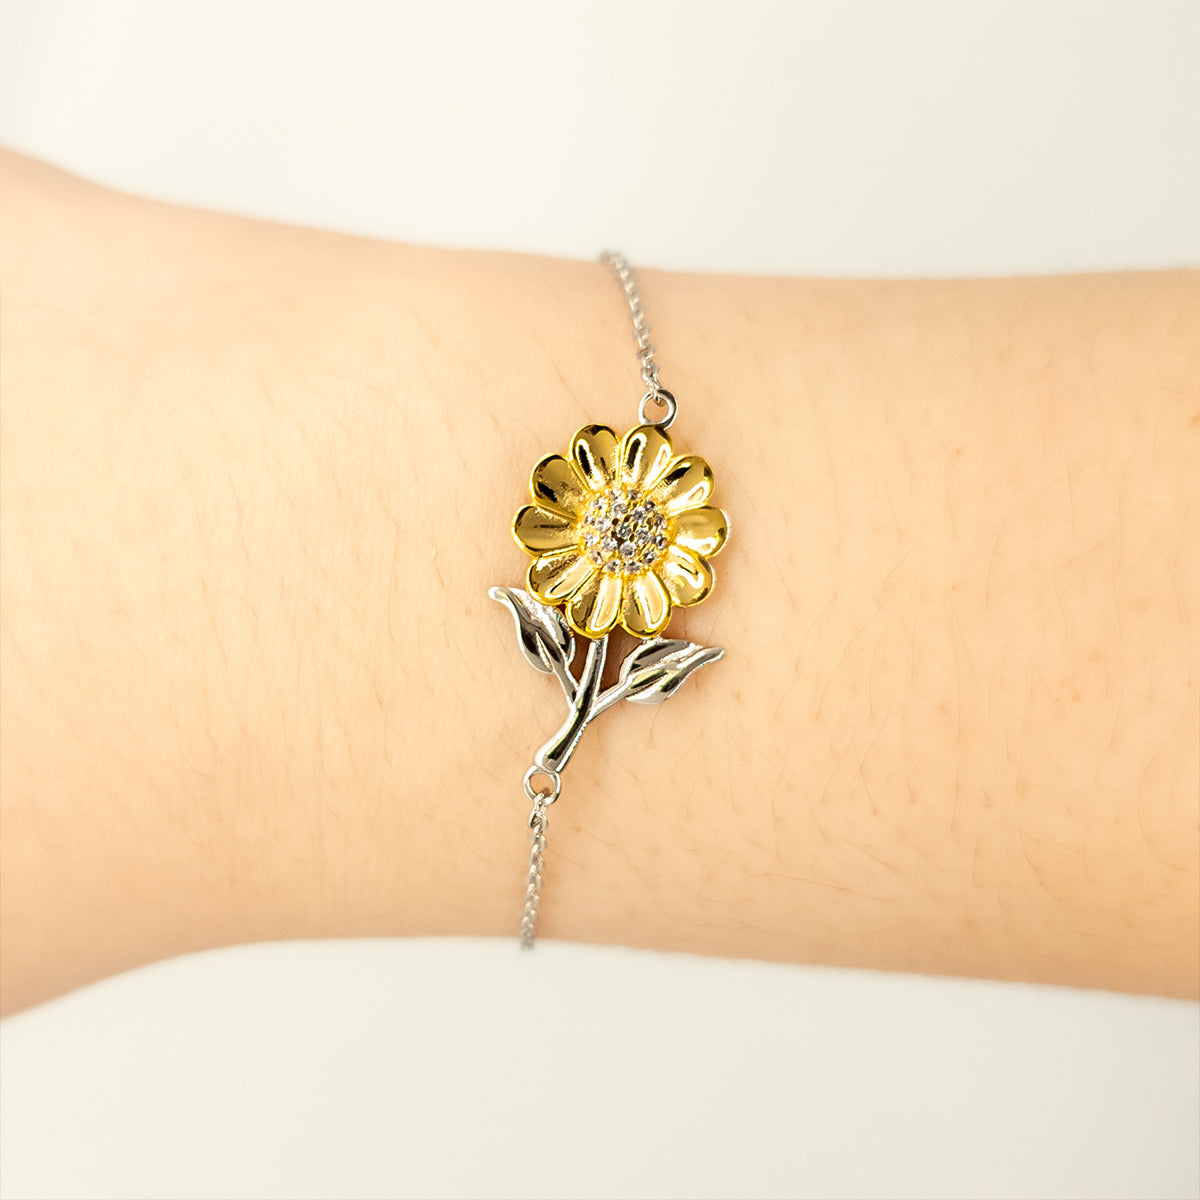 Sunflower Bracelet Godmum Special Place in Heart Engraved Inspirational Jewelry Gift for Birthday Holidays Anniversary Celebration